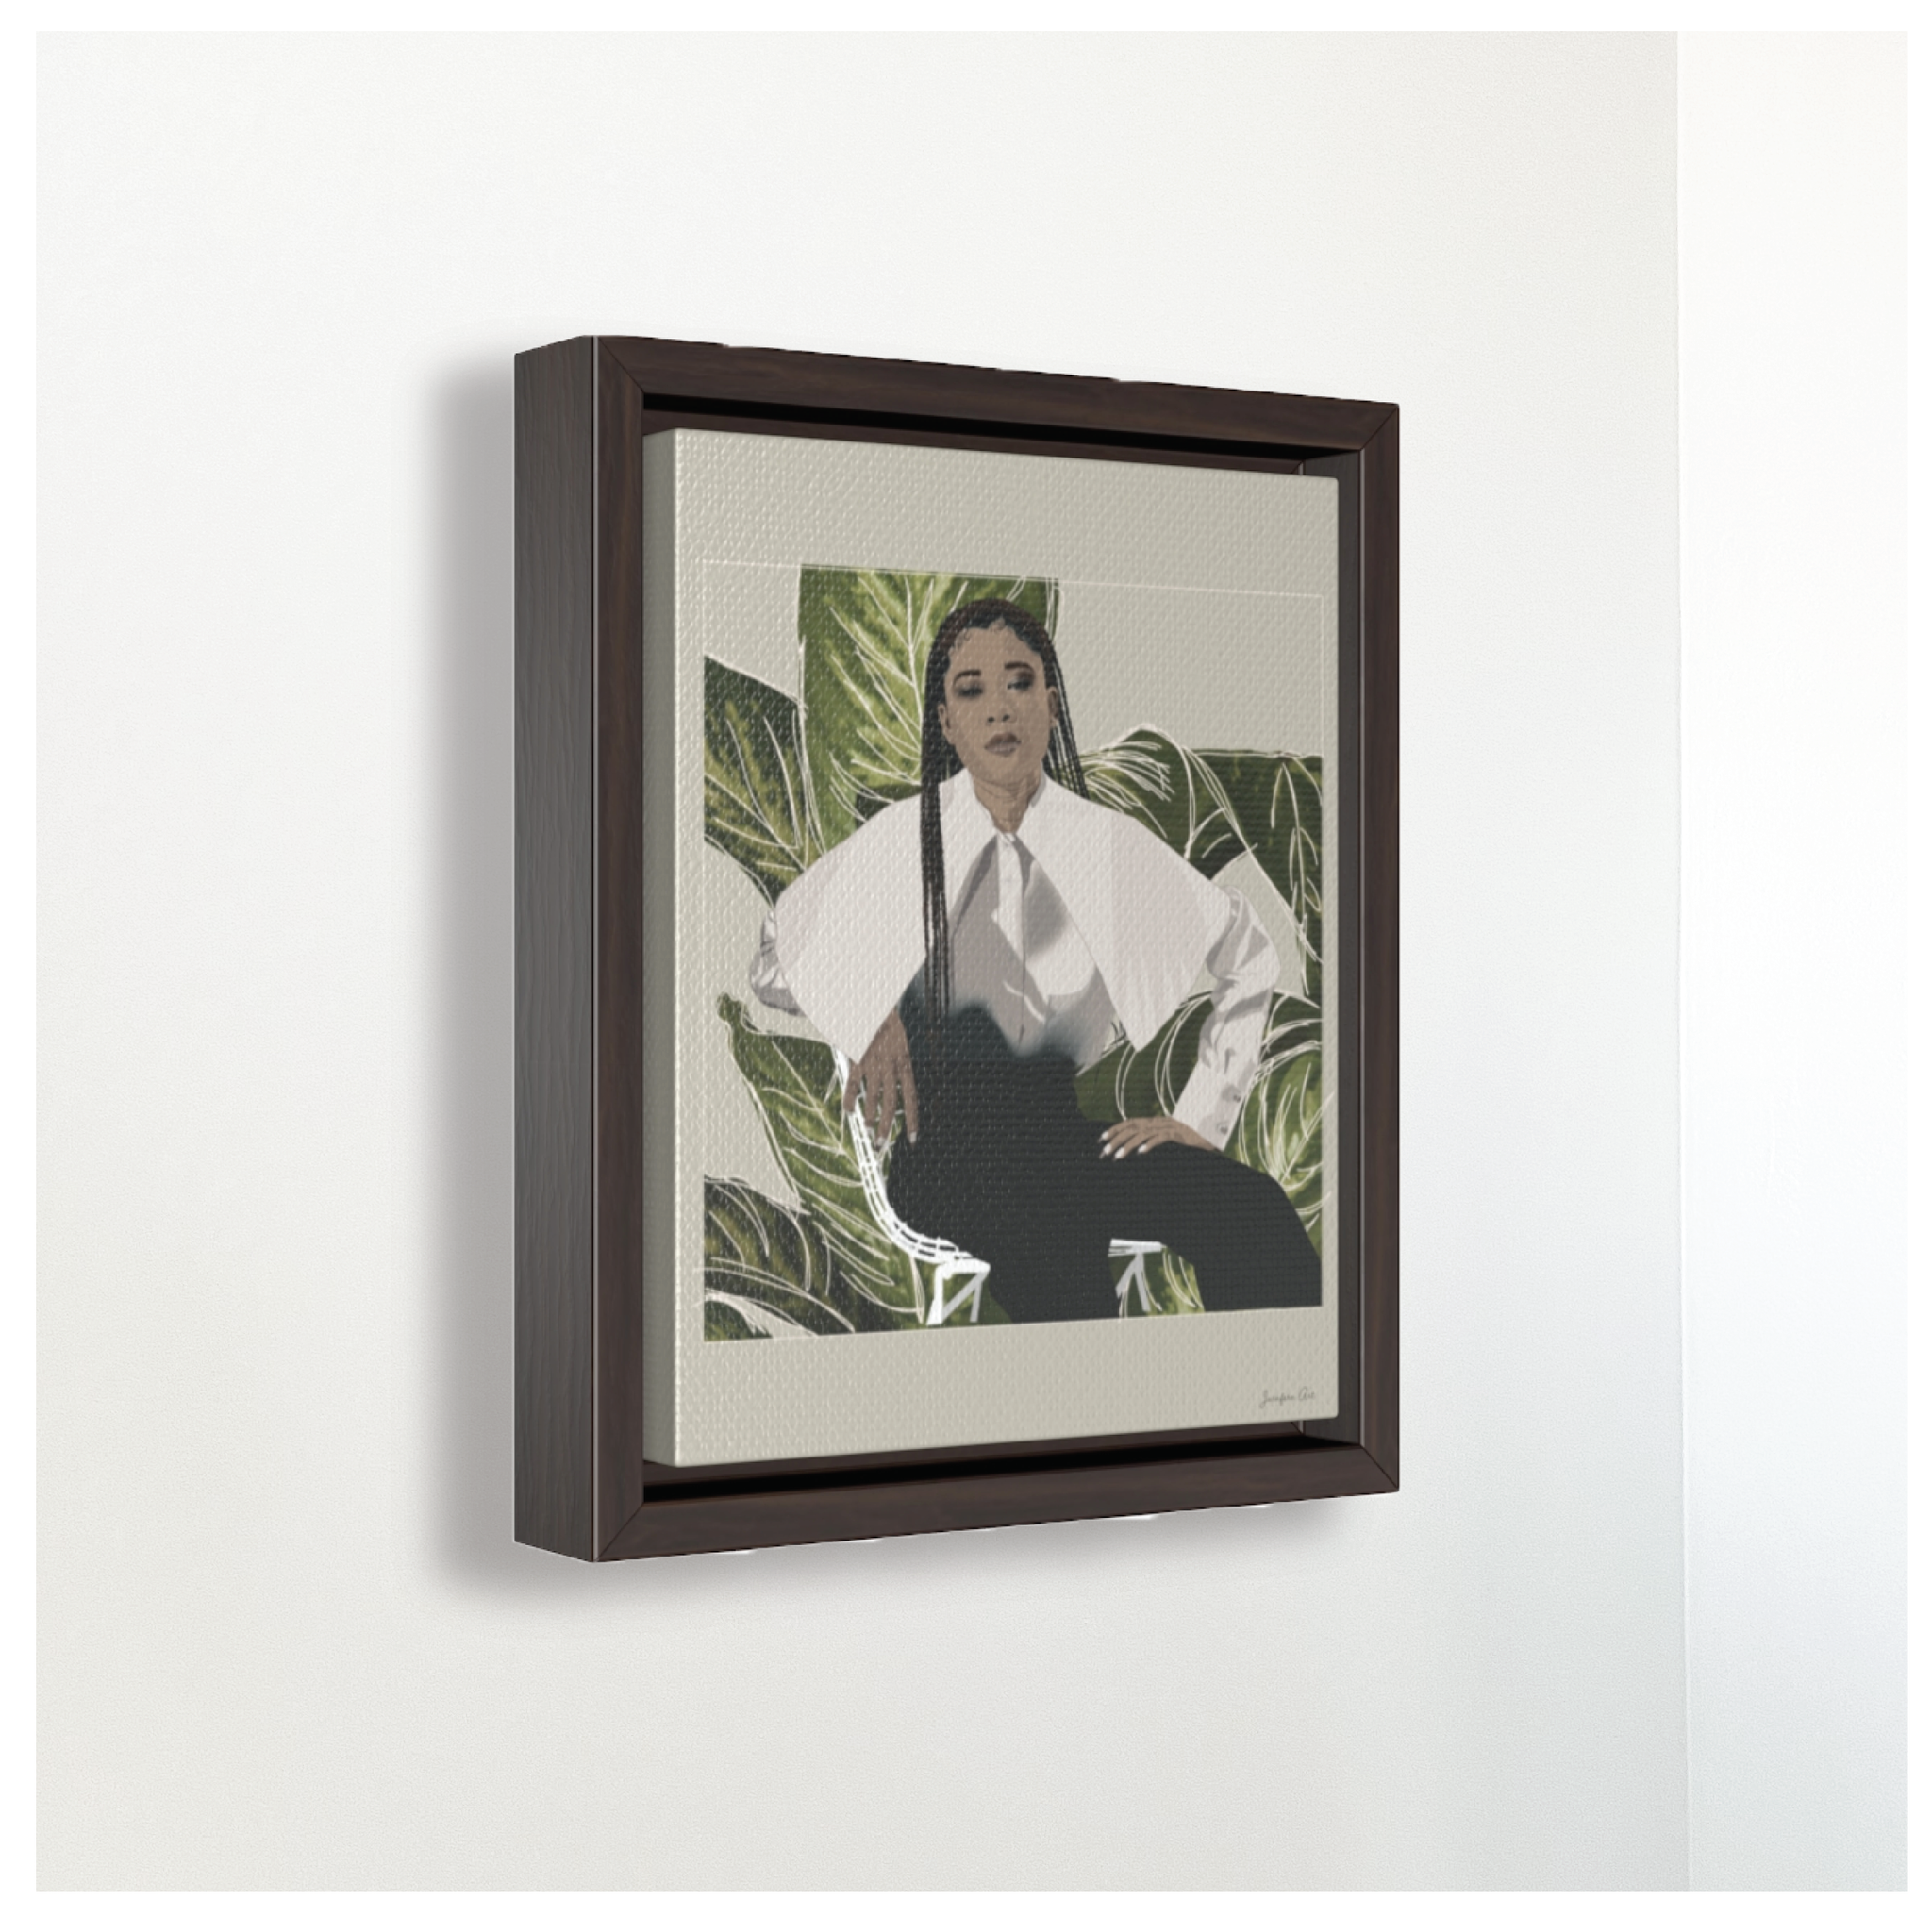 A framed canvas illustration with a beige background and a digital illustration of actress Storm Reid posing in a chair and wearing a white blouse and black trousers, with a cut-out photo of leaves behind her